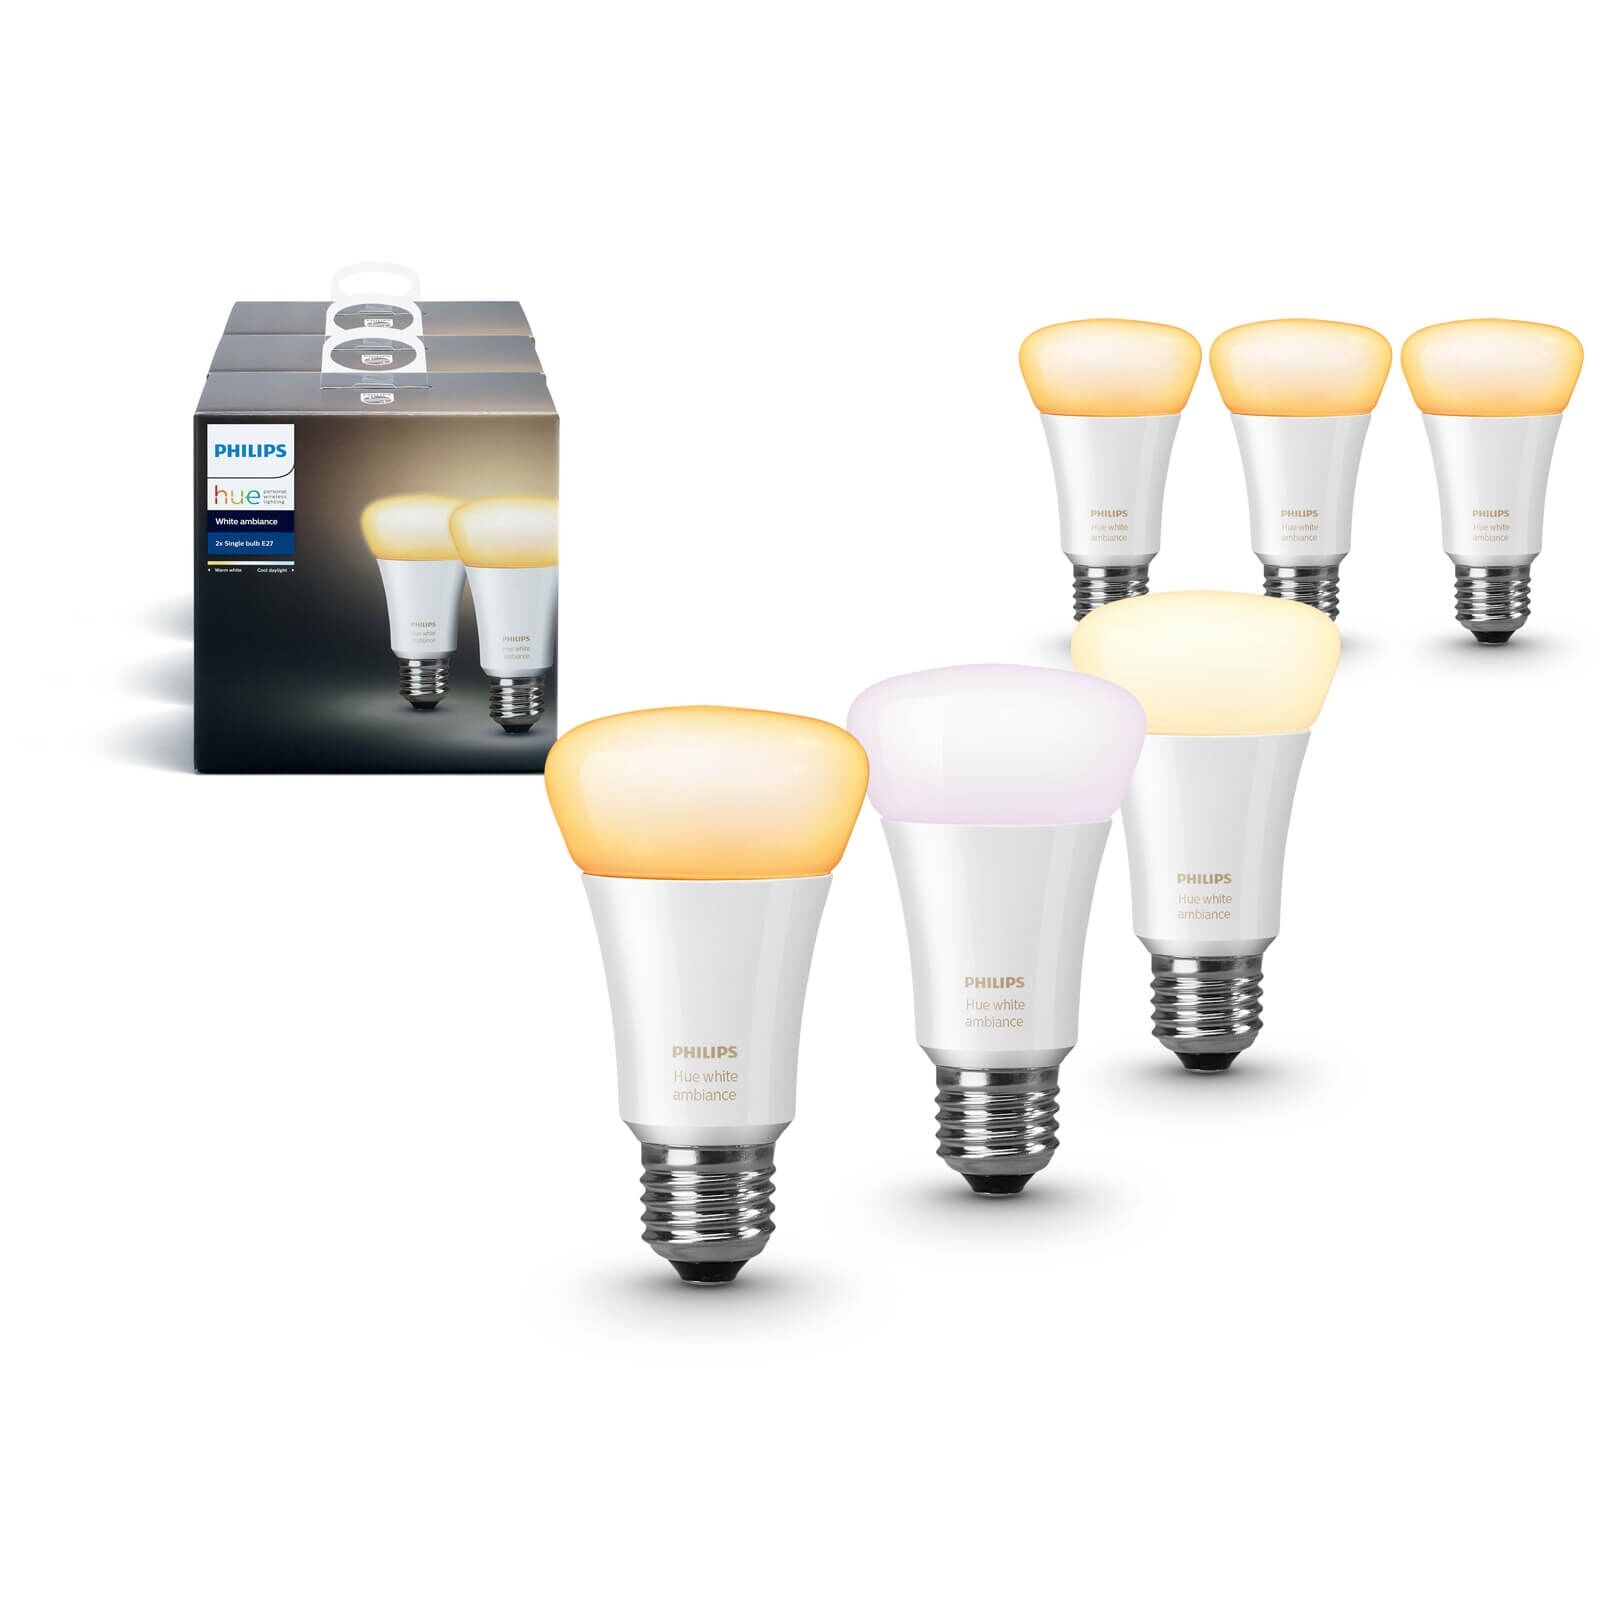 Philips Hue 1100lm White Ambiance E27, 6-pack